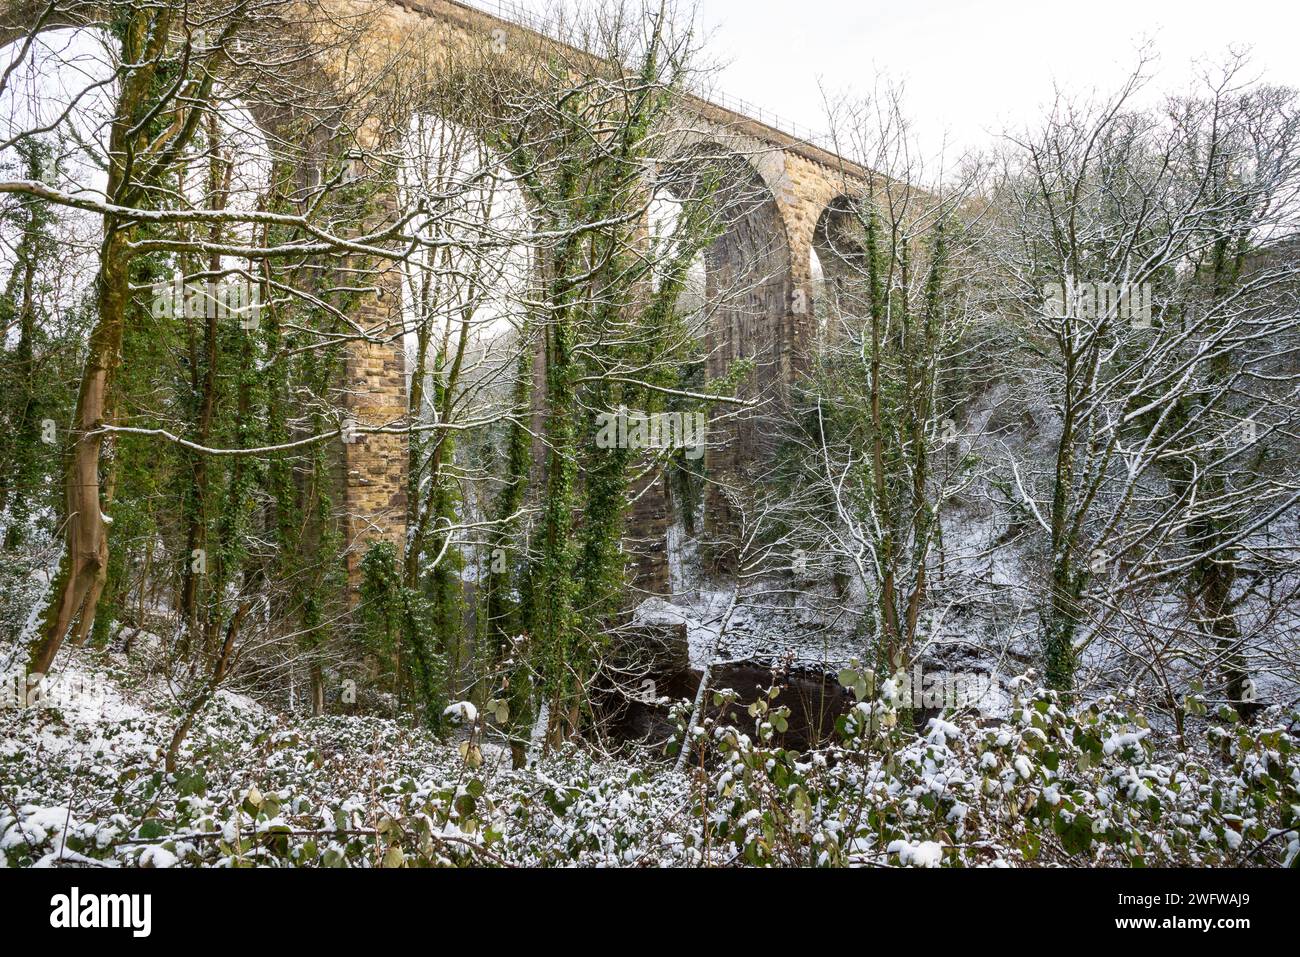 A snowy morning on the Peak Forest Canal at Marple, Stockport, Greater Manchester, England. The railway viaduct over the river Goyt. Stock Photo